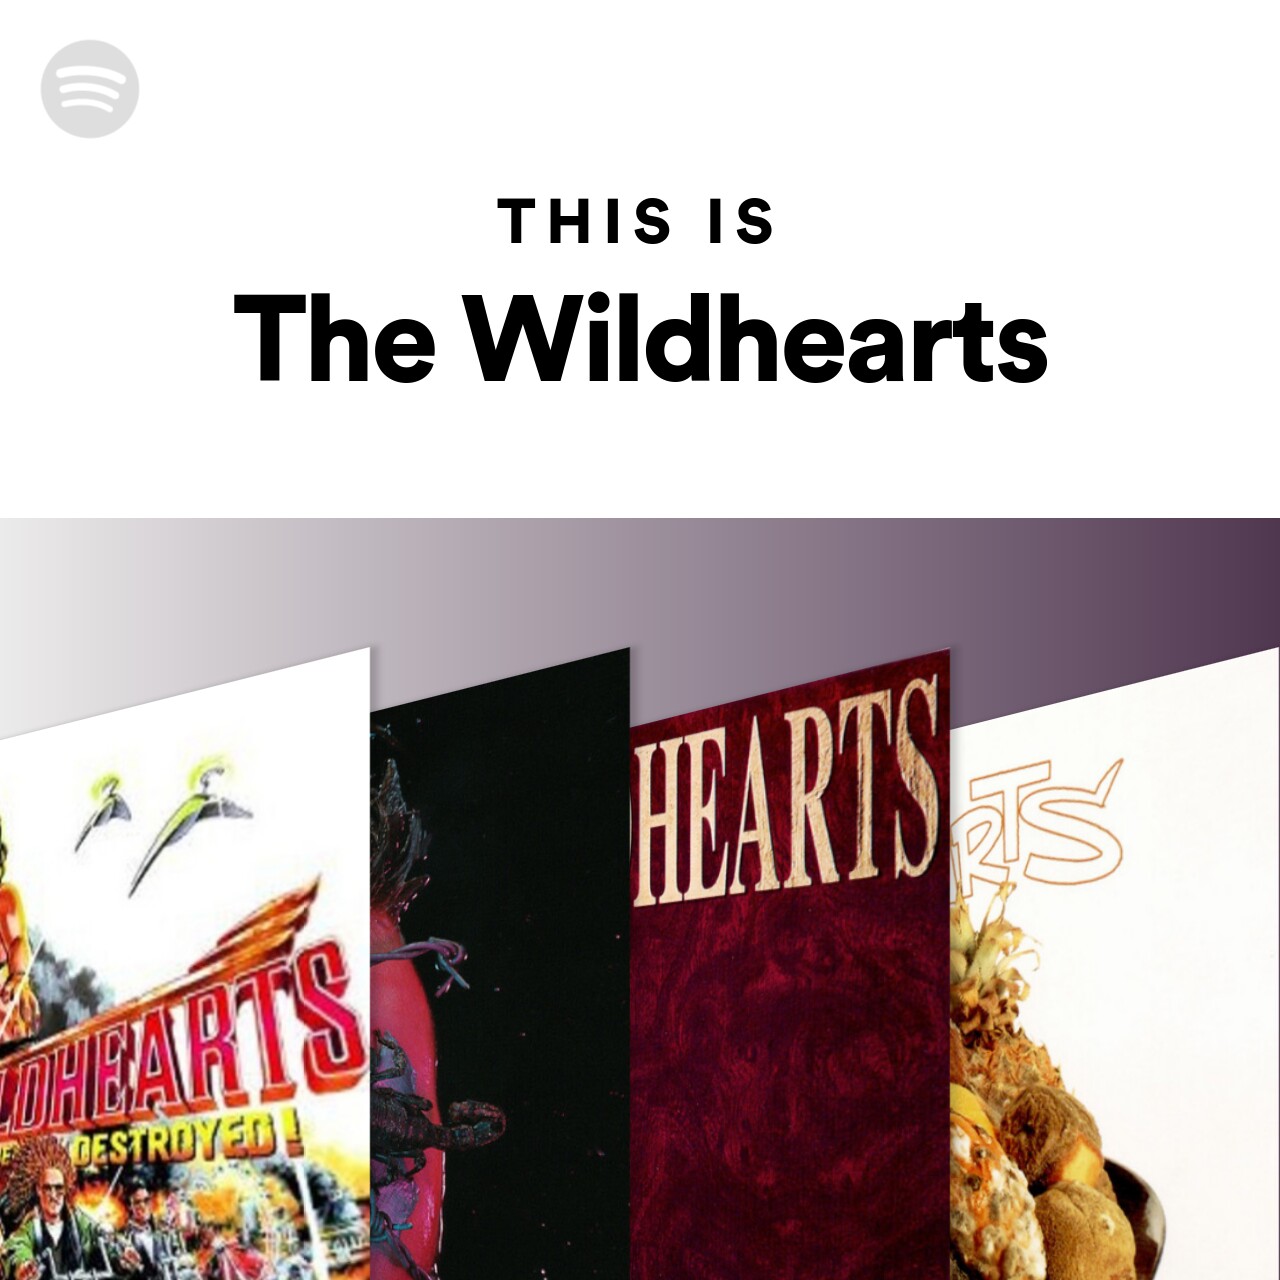 This Is The Wildhearts